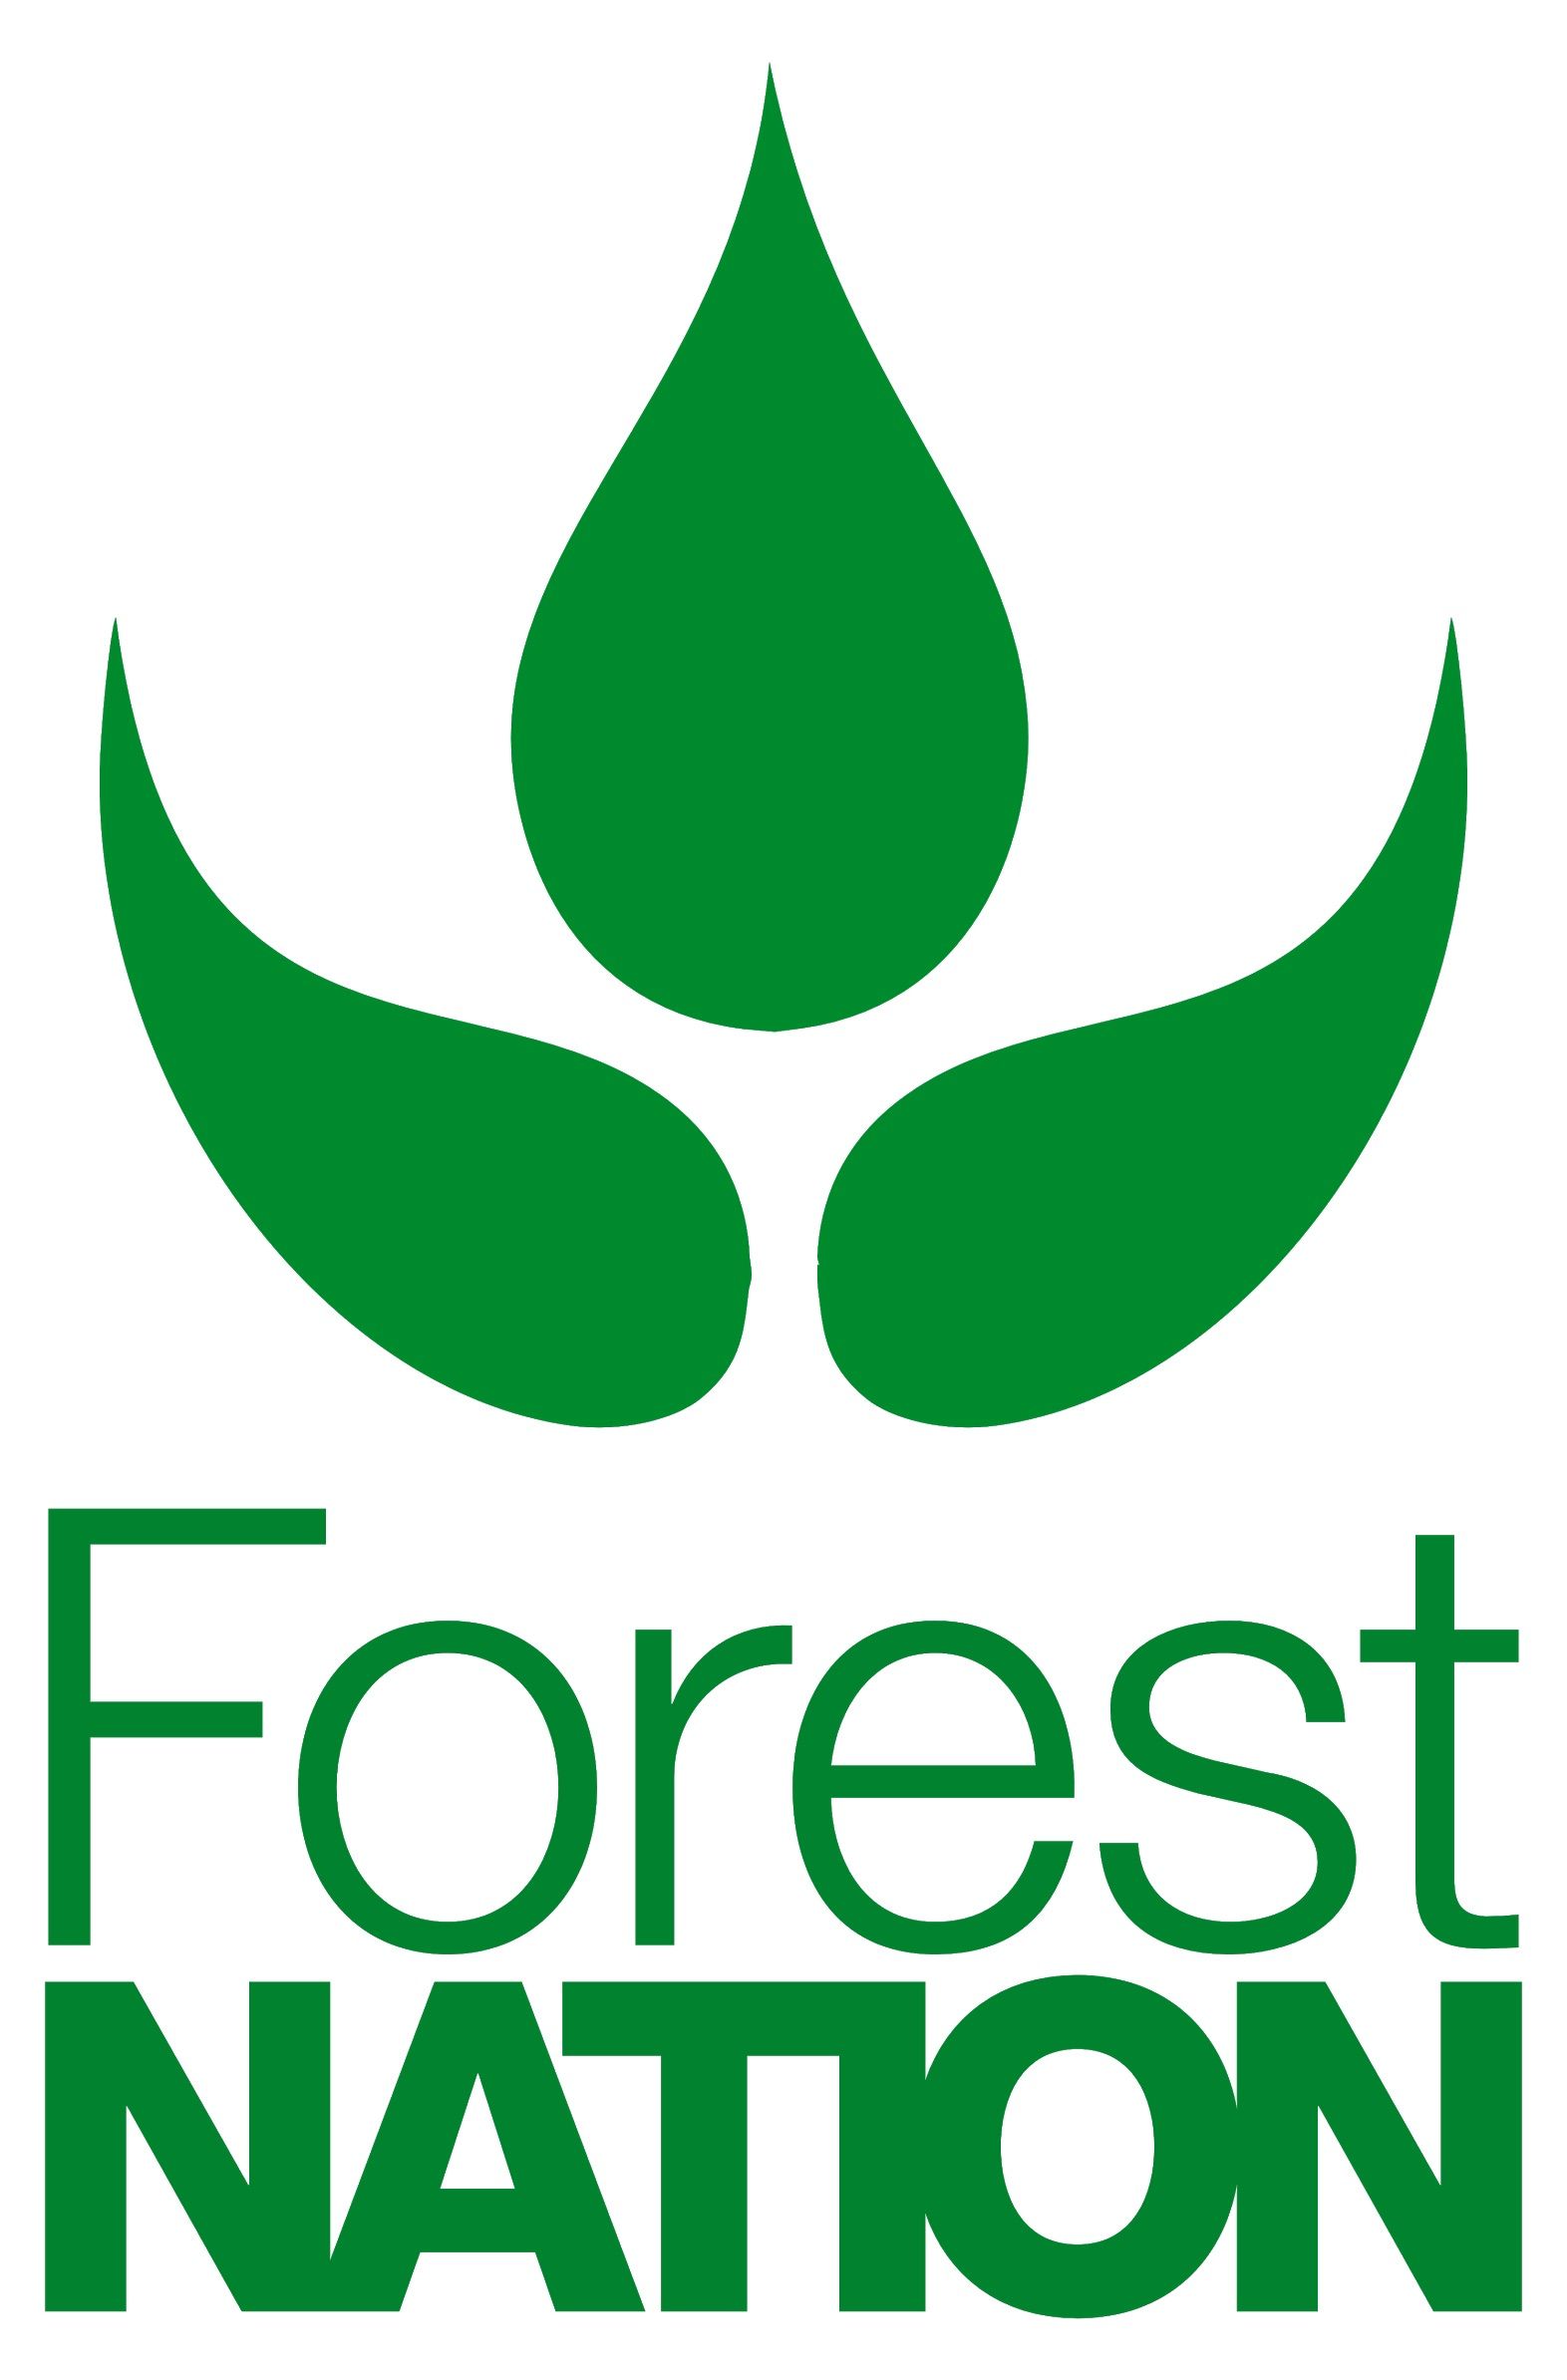 Forest Nation